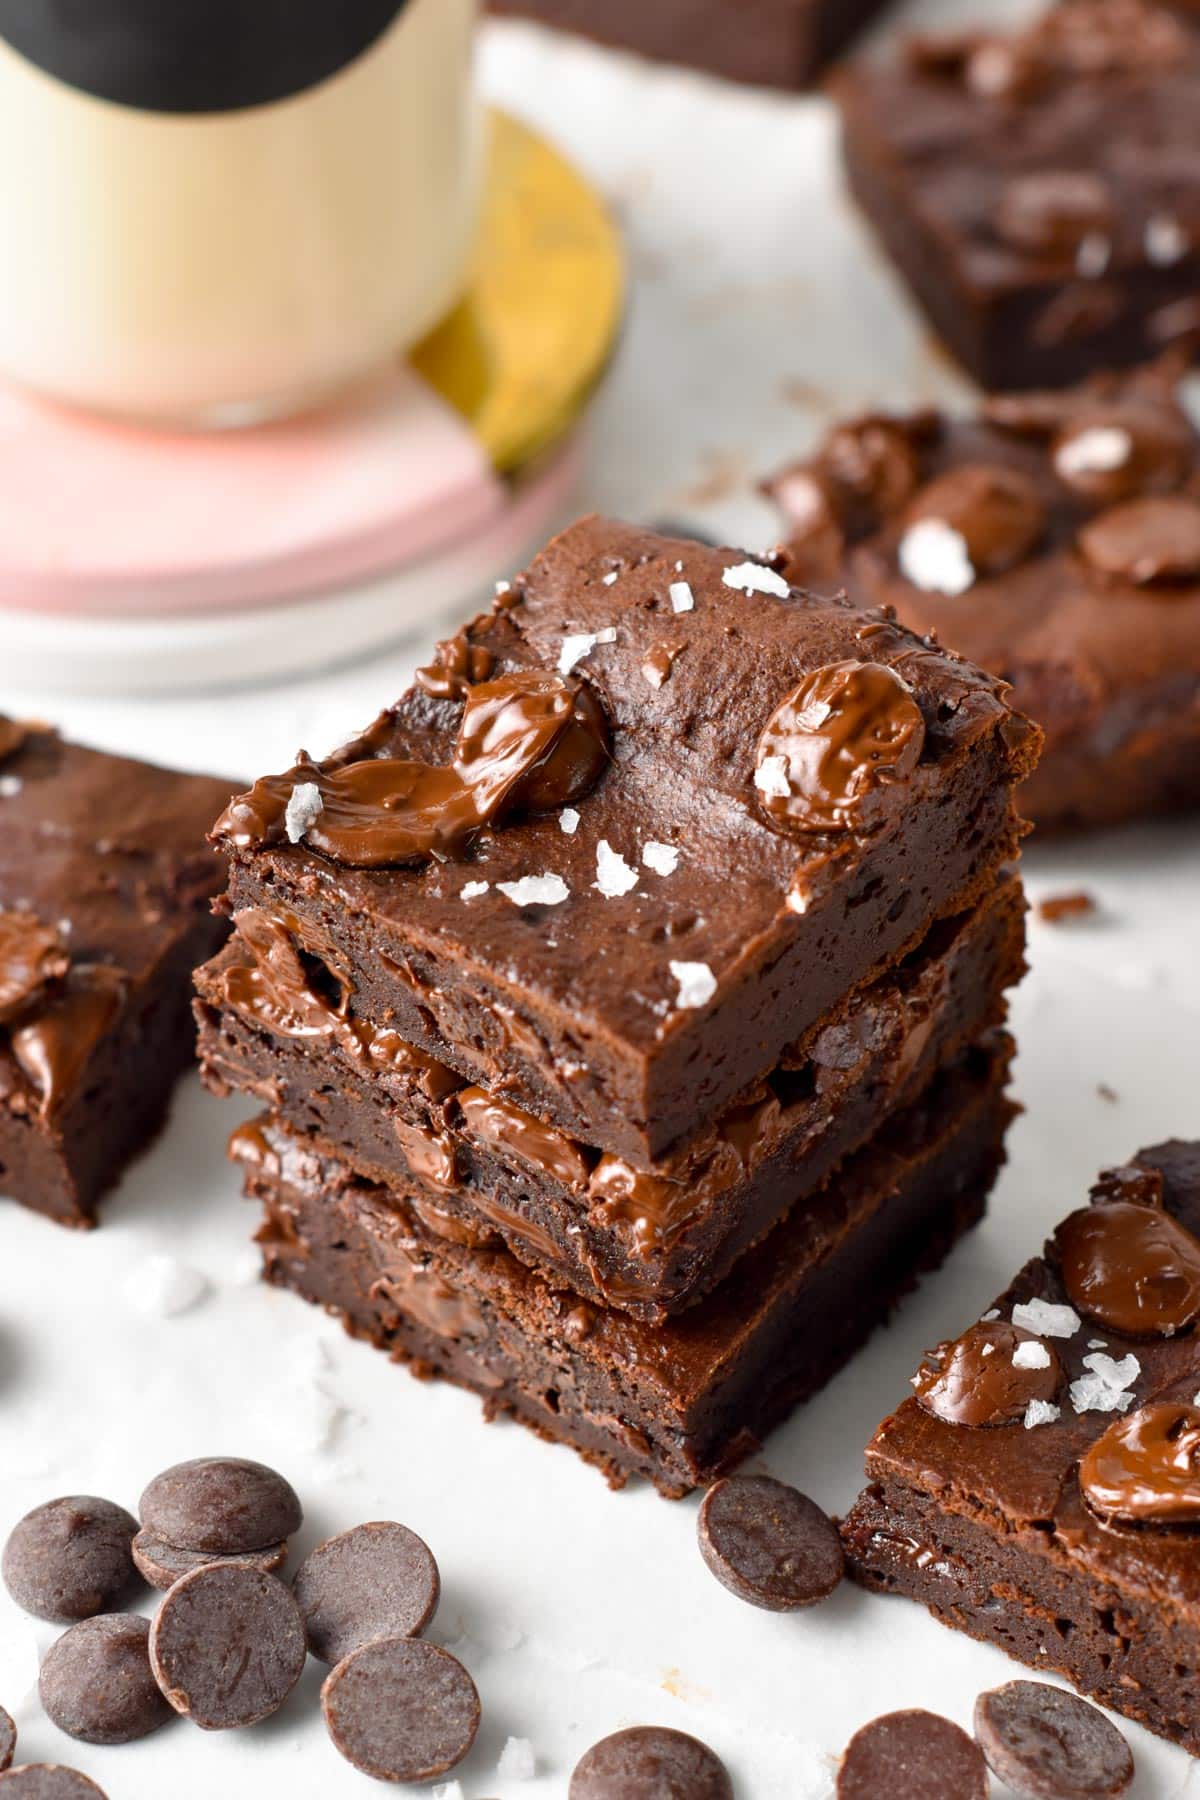 These healthy Greek Yogurt Brownies are the most surprising low calories brownies you will ever try. They are fudgy, chewy brownies packed with high-protein Greek yogurt and only 49 kcal per serving.